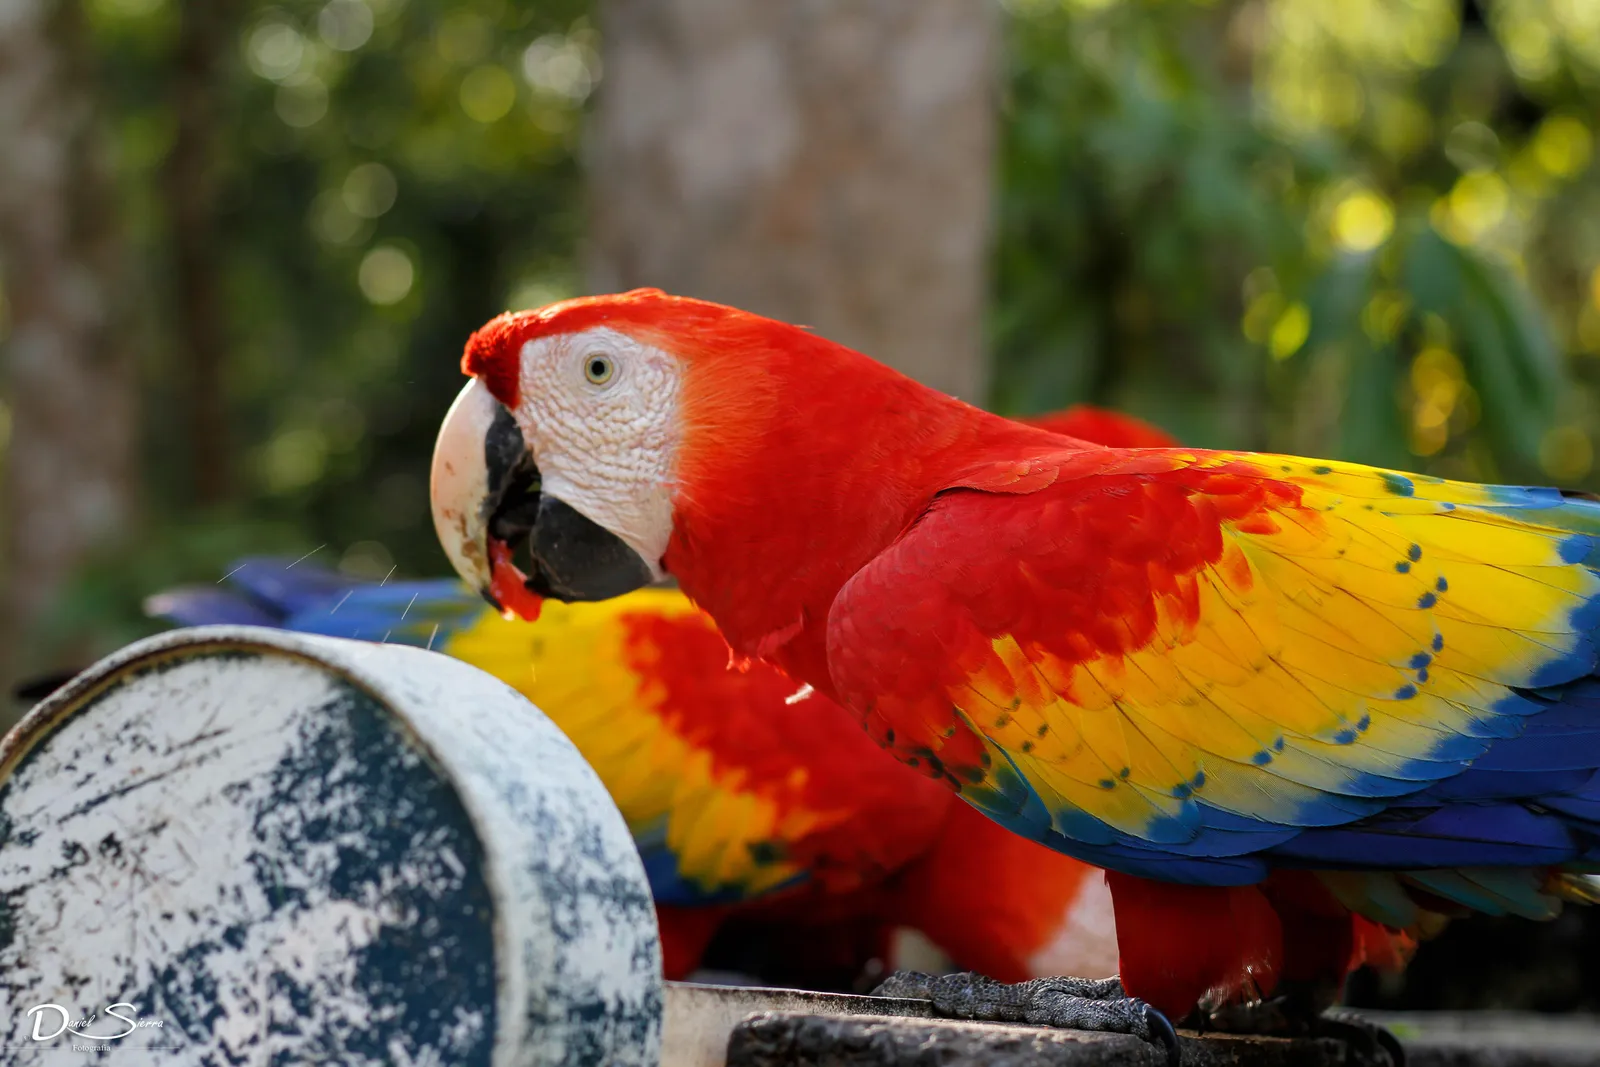 How The Stunning Scarlet Macaw Came